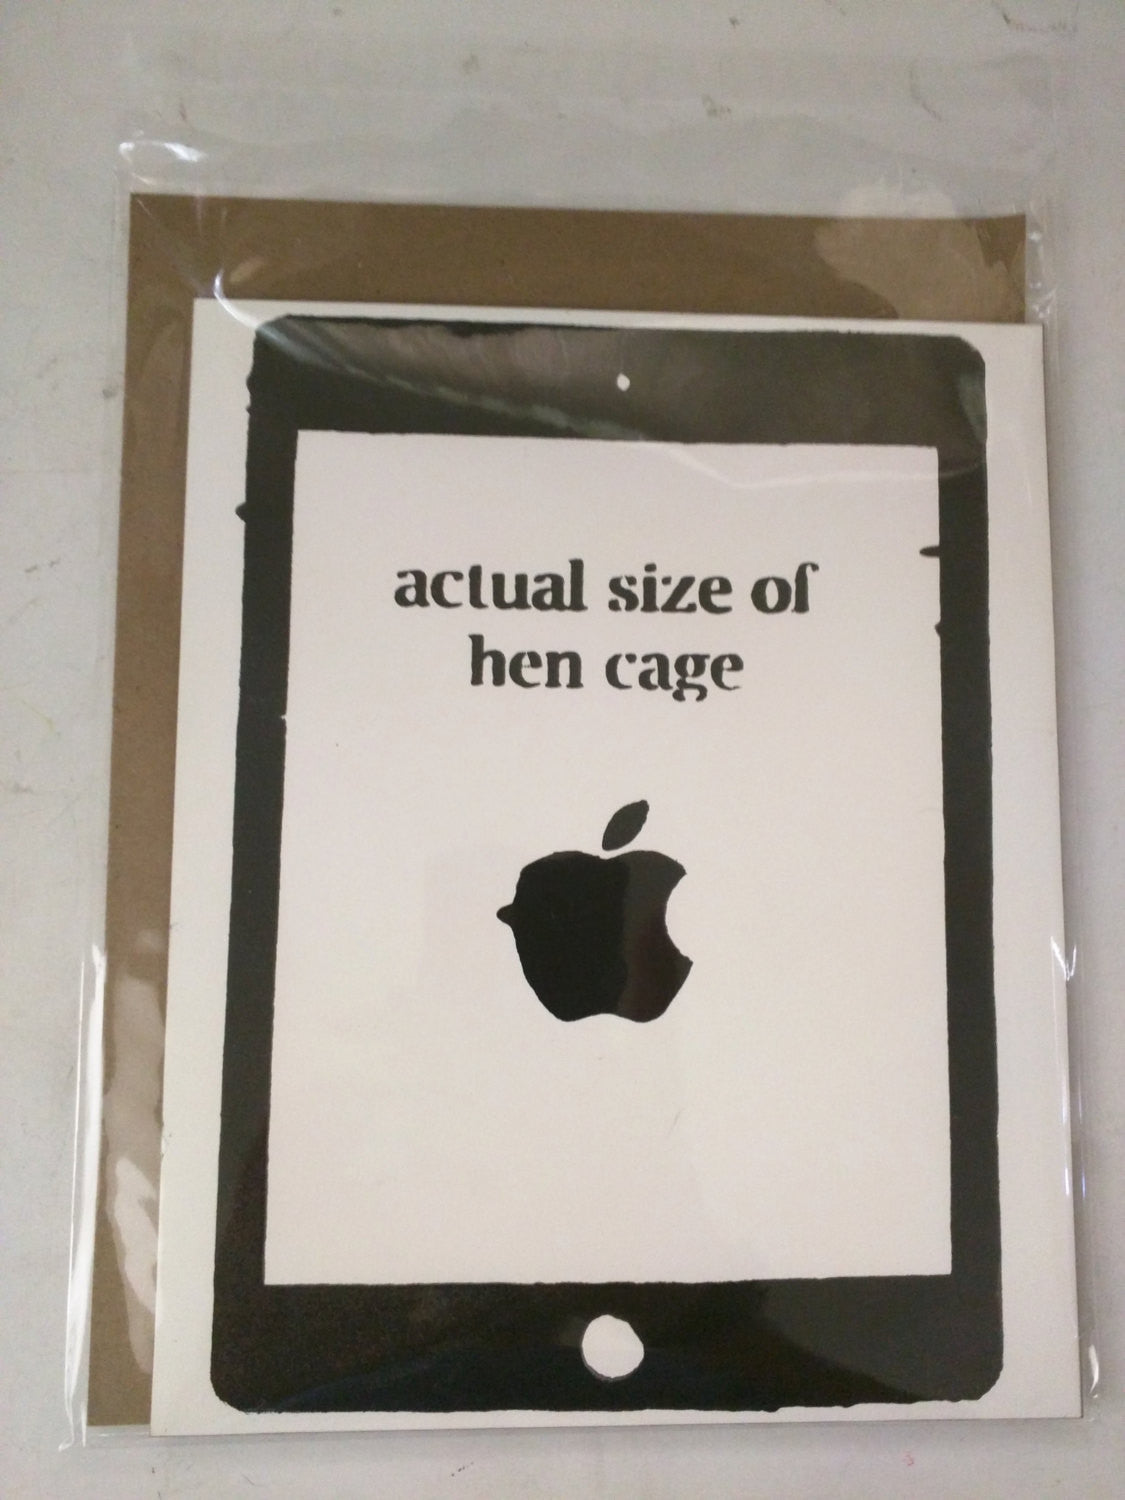 Limited Edition of 150 10x10 on Gessobord of Artwork "Actual Size of Hen Cage" featuring an Apple iPad Signed L3f0u